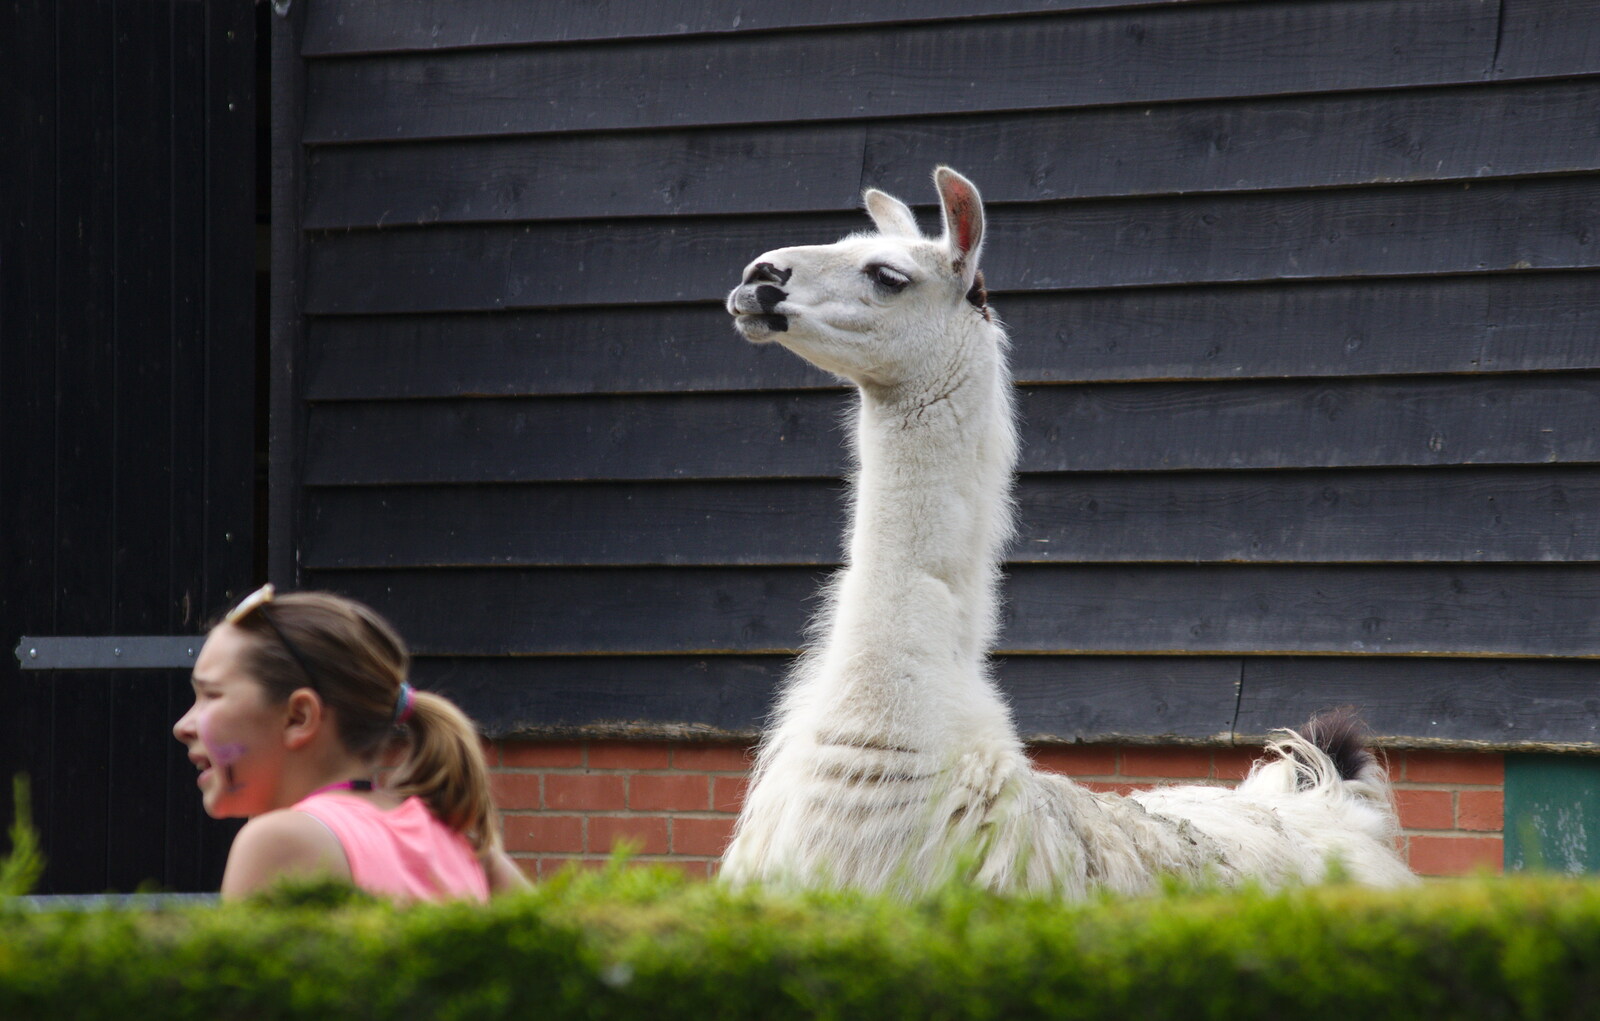 An inquisitive Llama from A Birthday Trip to the Zoo, Banham, Norfolk - 26th May 2014